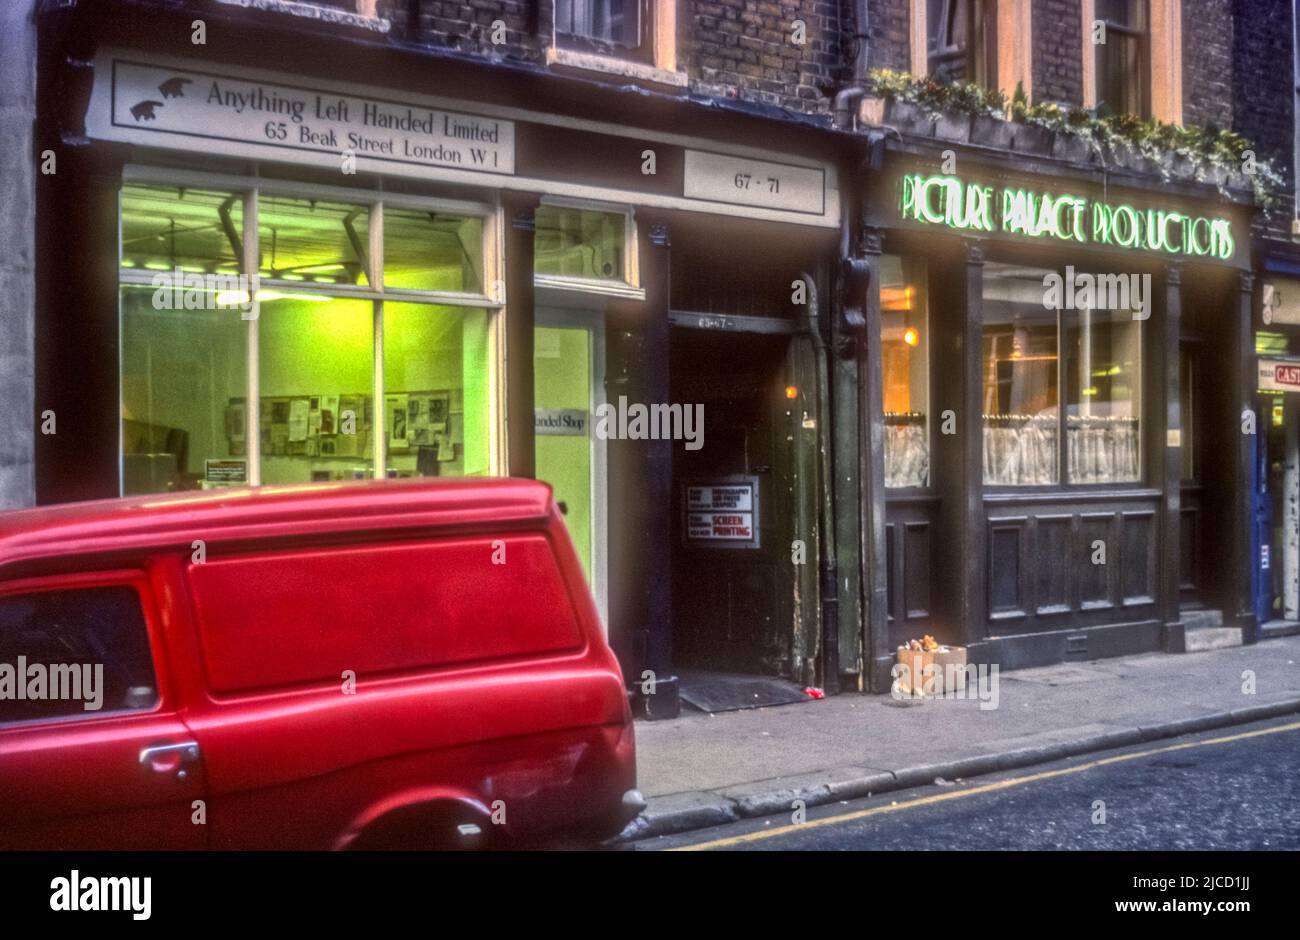 1970s archive image of Anything Left Handed Limited and Picture Palace Productions in Beak Street, Soho, London. Stock Photo